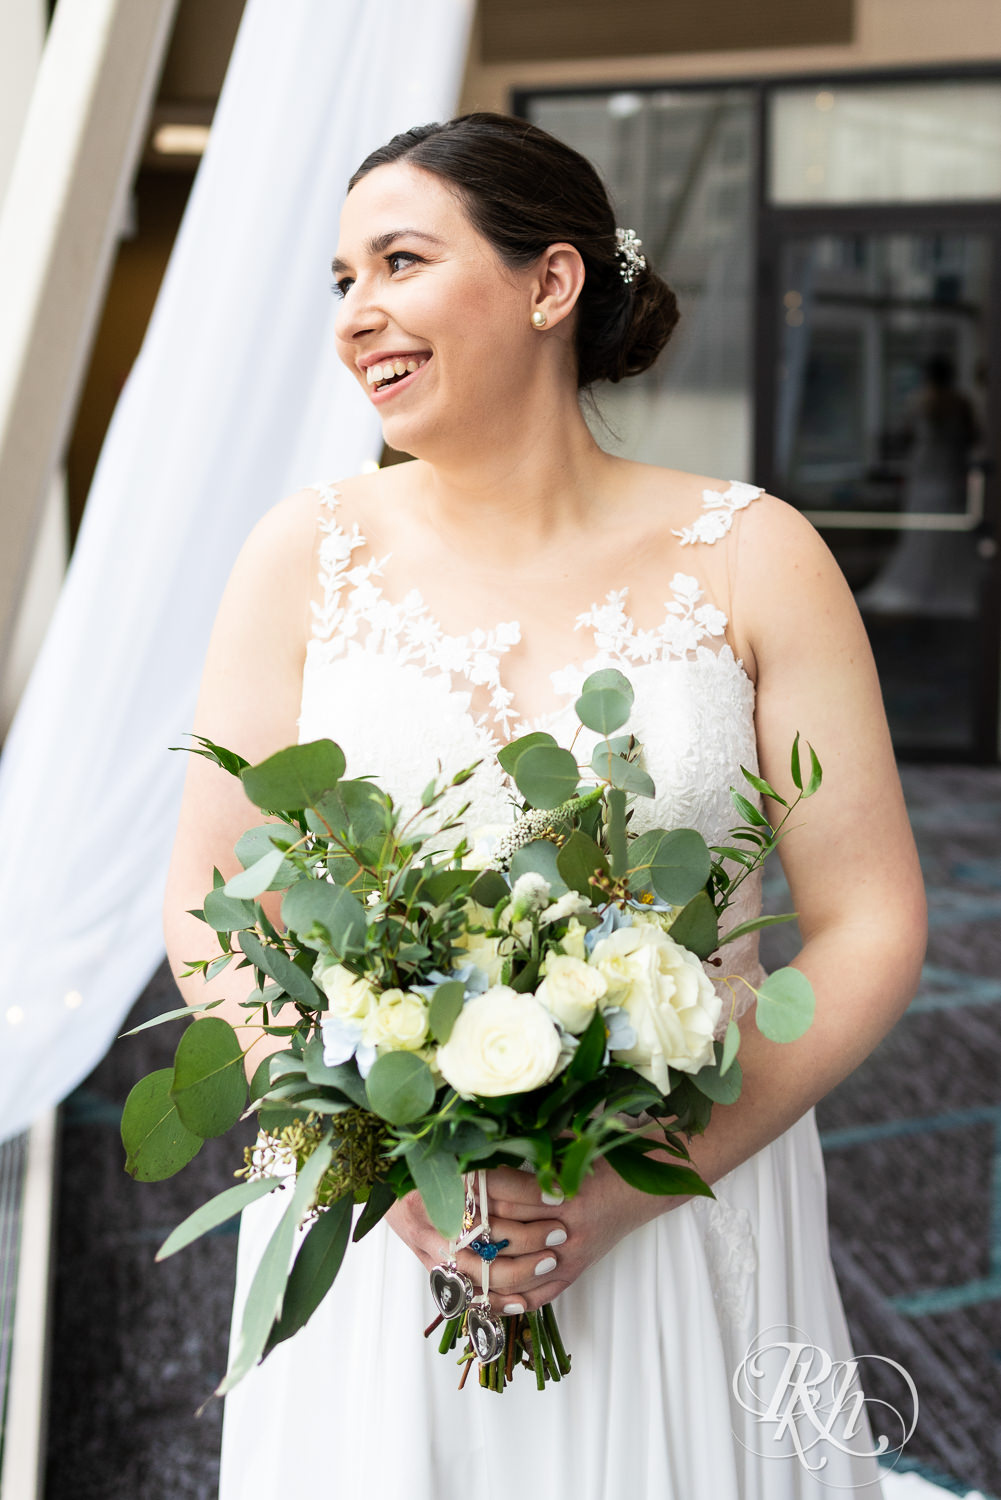 Bride holding flowers and smiling out window at Doubletree Hilton Saint Paul in Saint Paul, Minnesota.